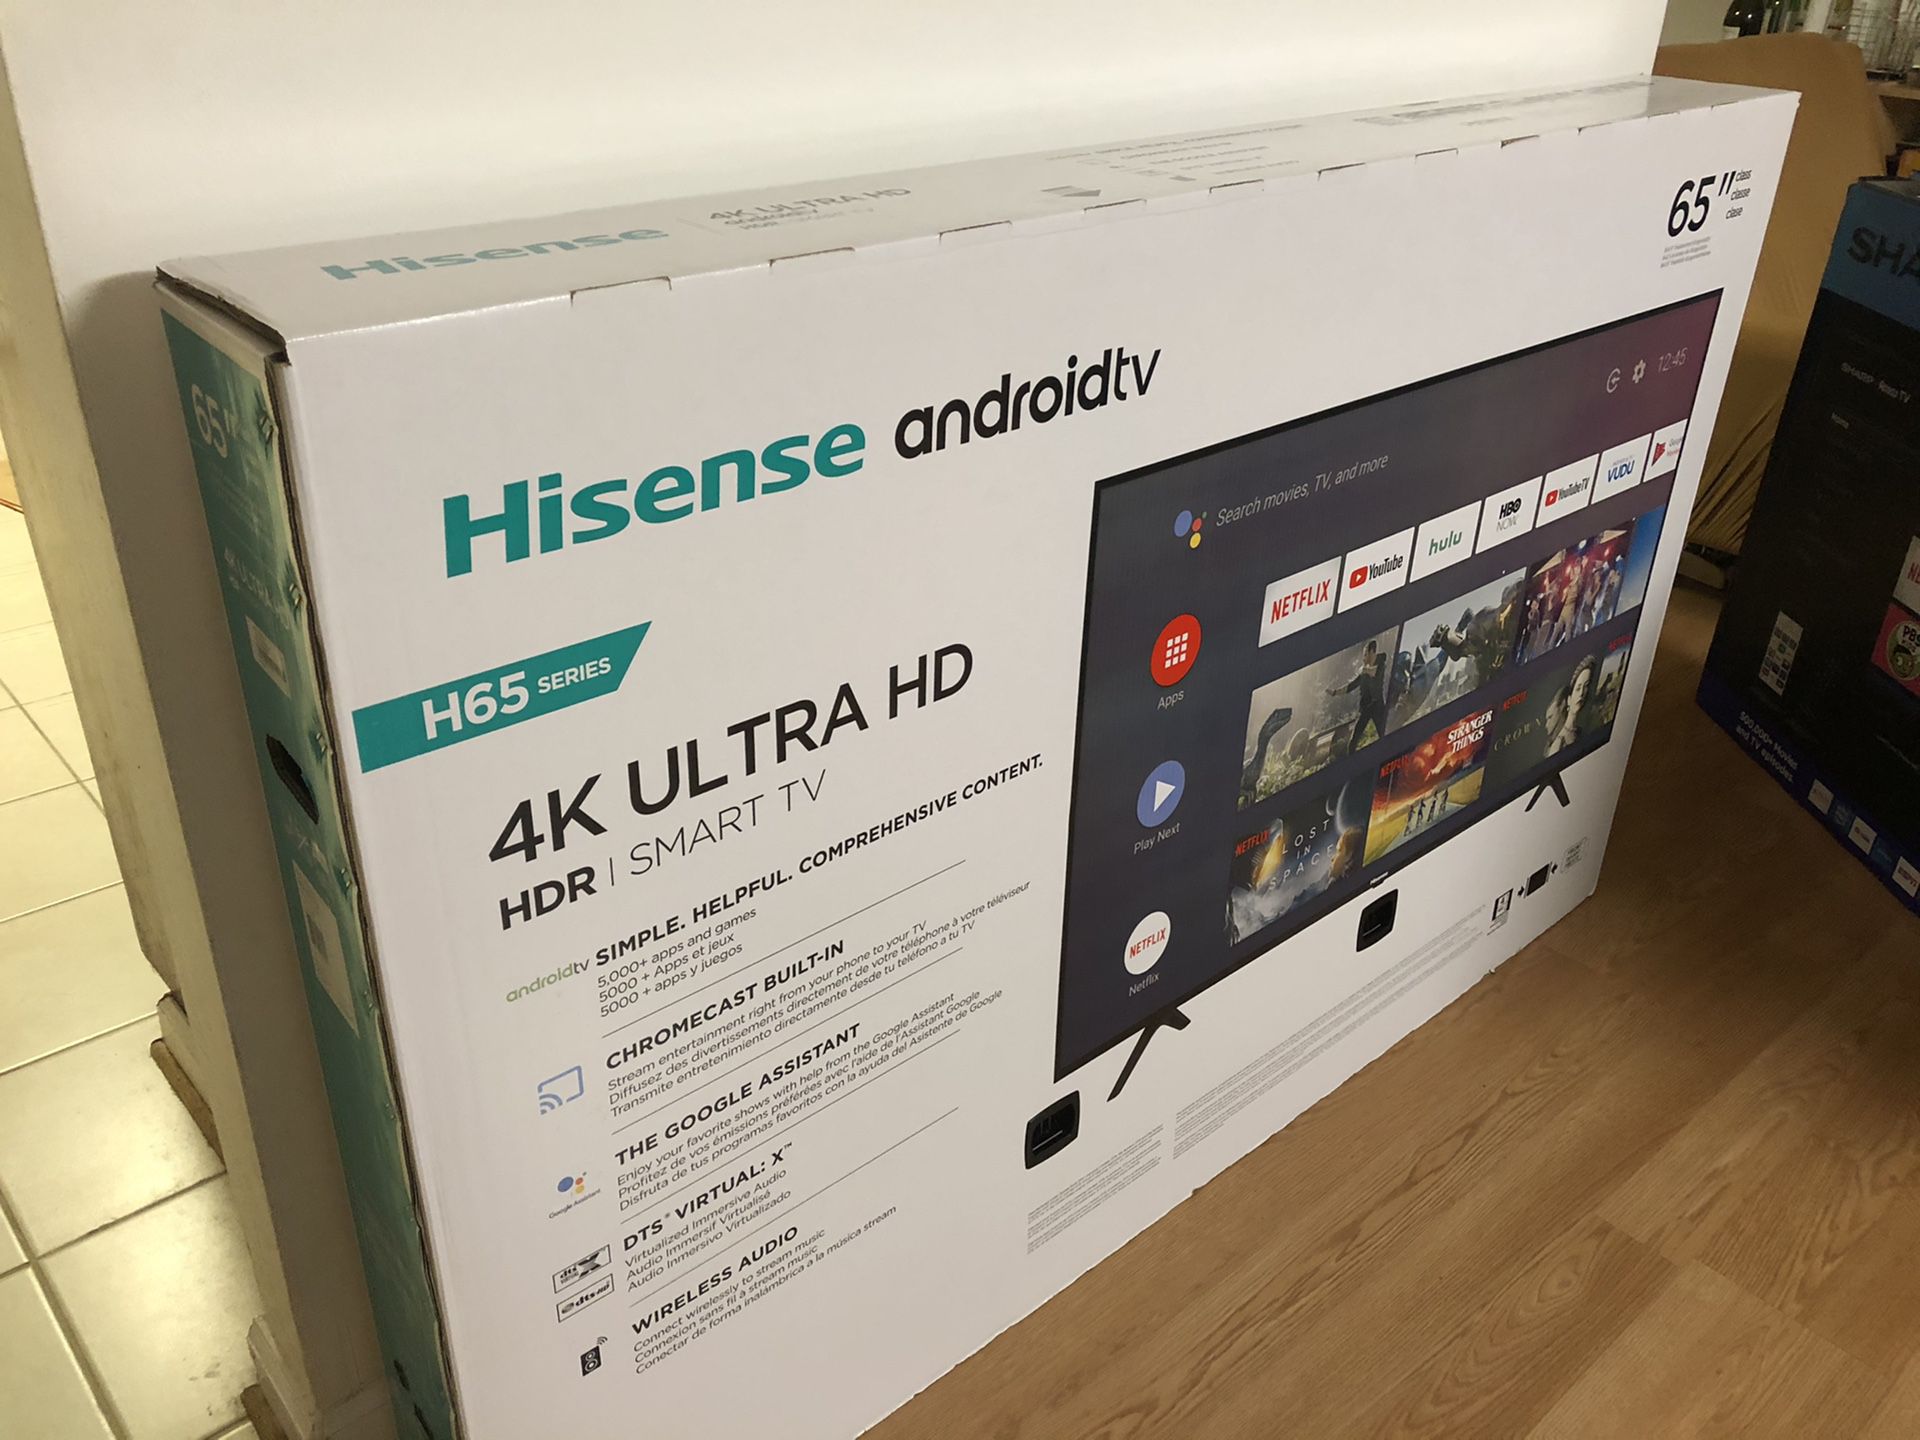 65 inches TV Hisense Android TV Brand New - $345 Price is Firm